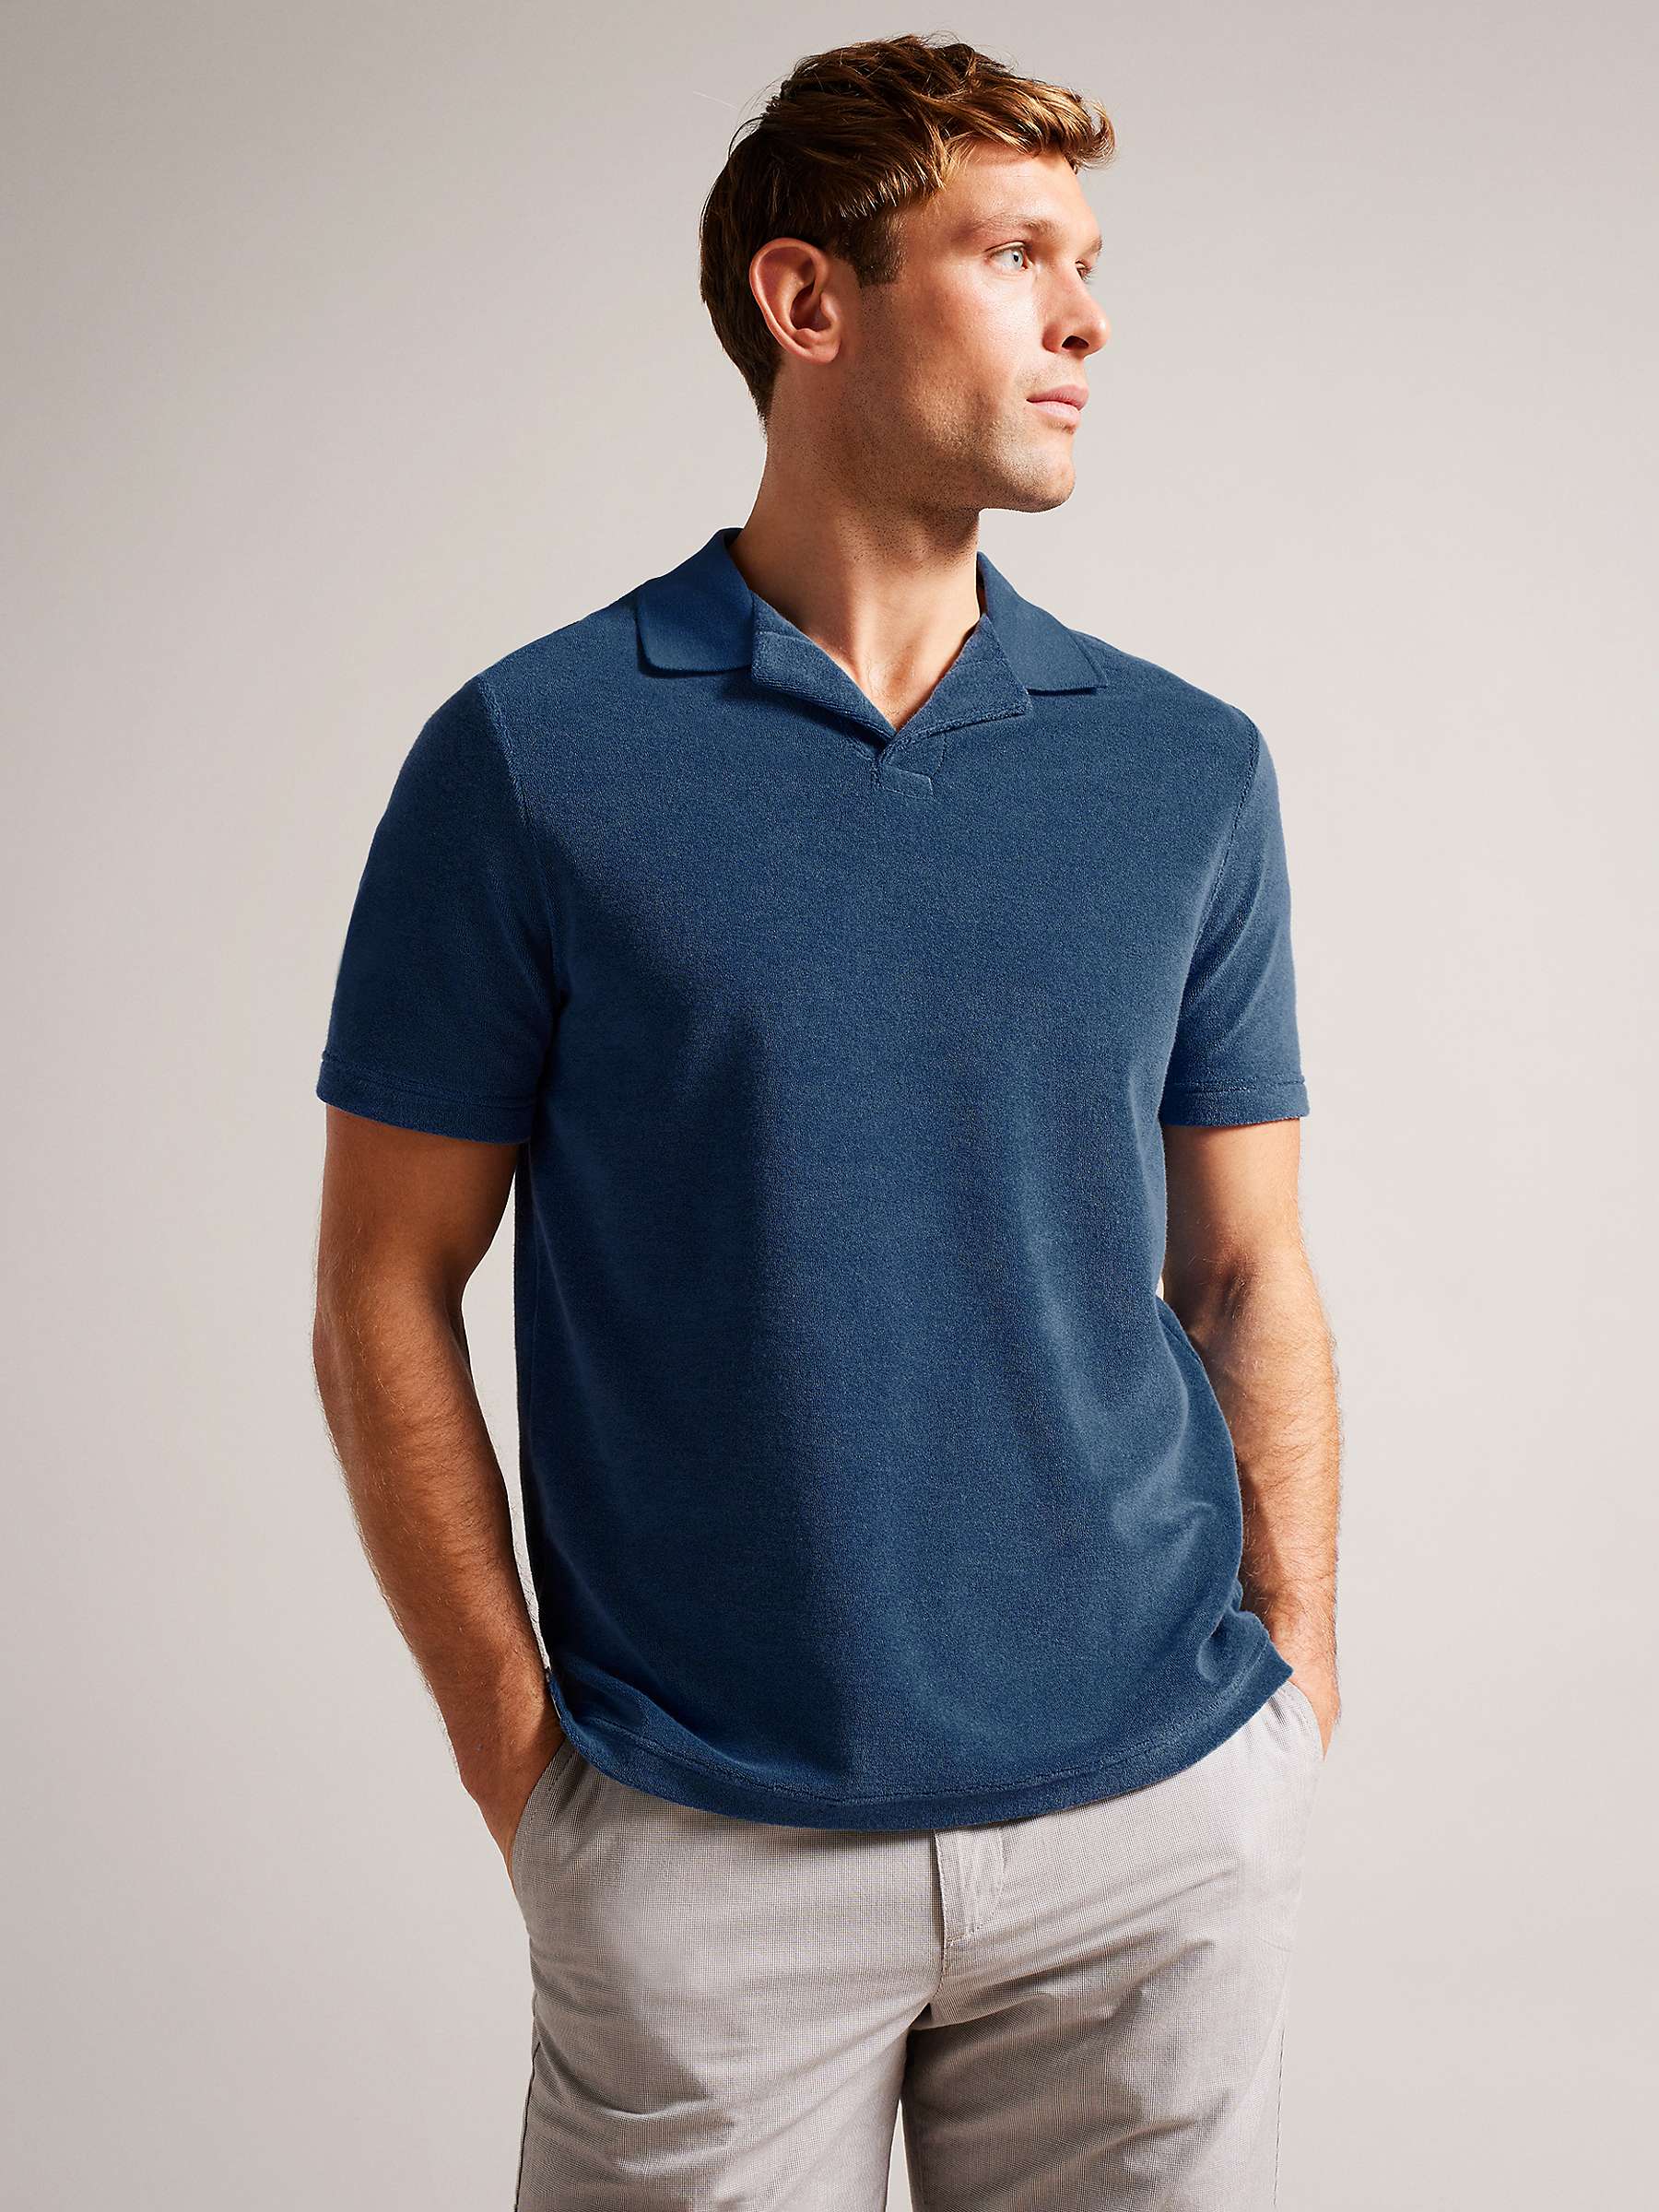 Buy Ted Baker Short Sleeved Towelling Polo Online at johnlewis.com